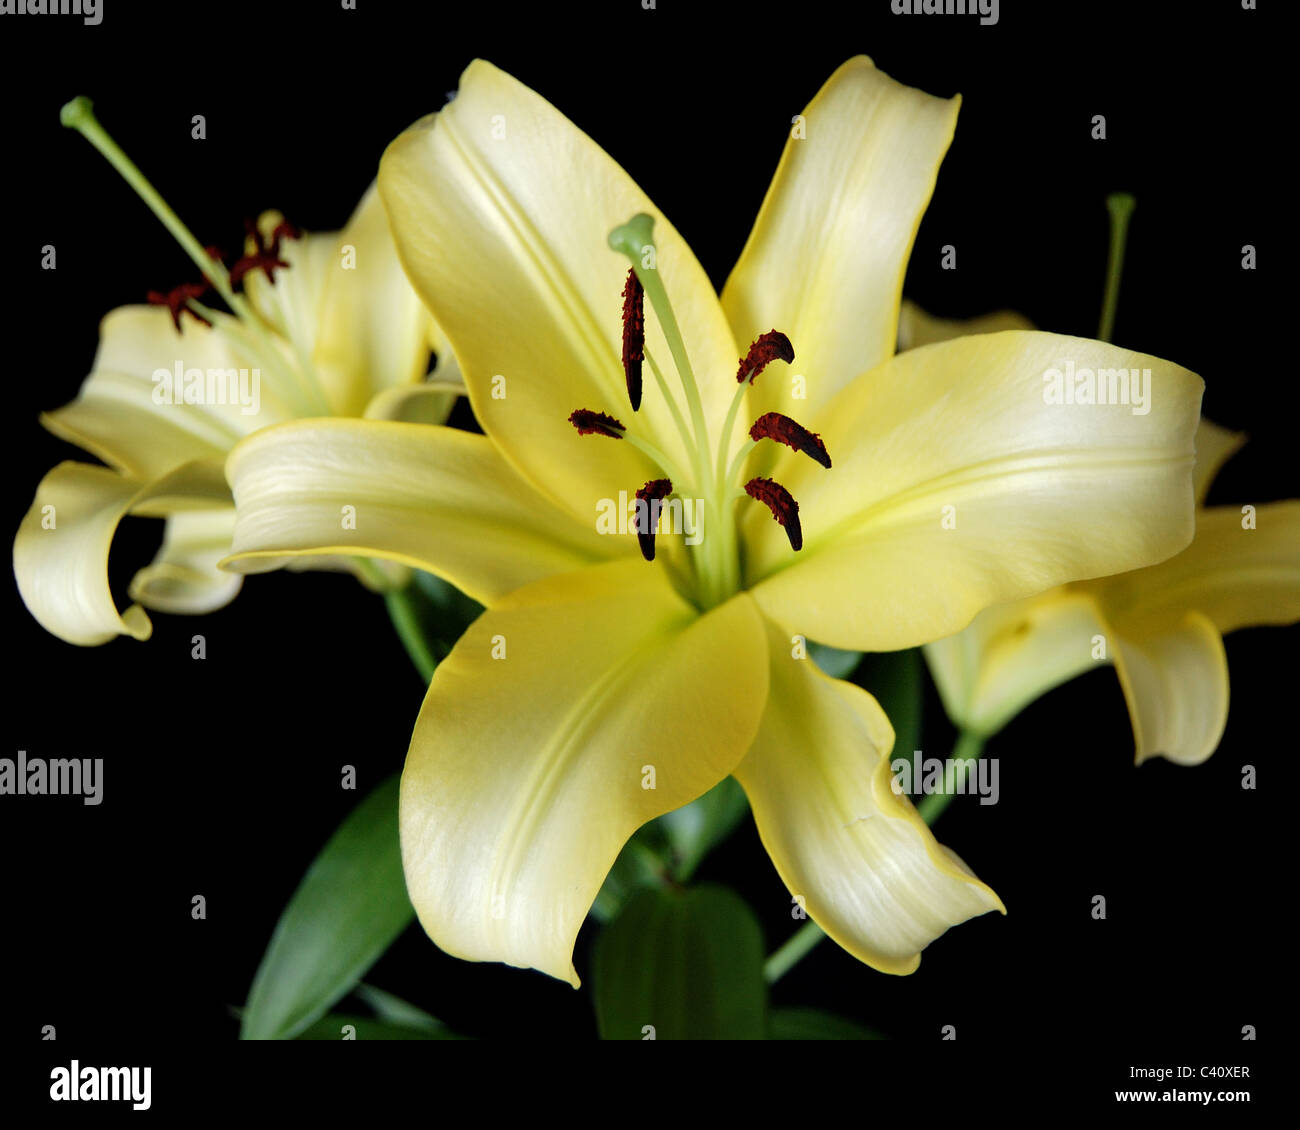 This is an Yellow Asian Lily.It is one of the many beautiful Asian Hybrid Lilies grown in Florida. Stock Photo